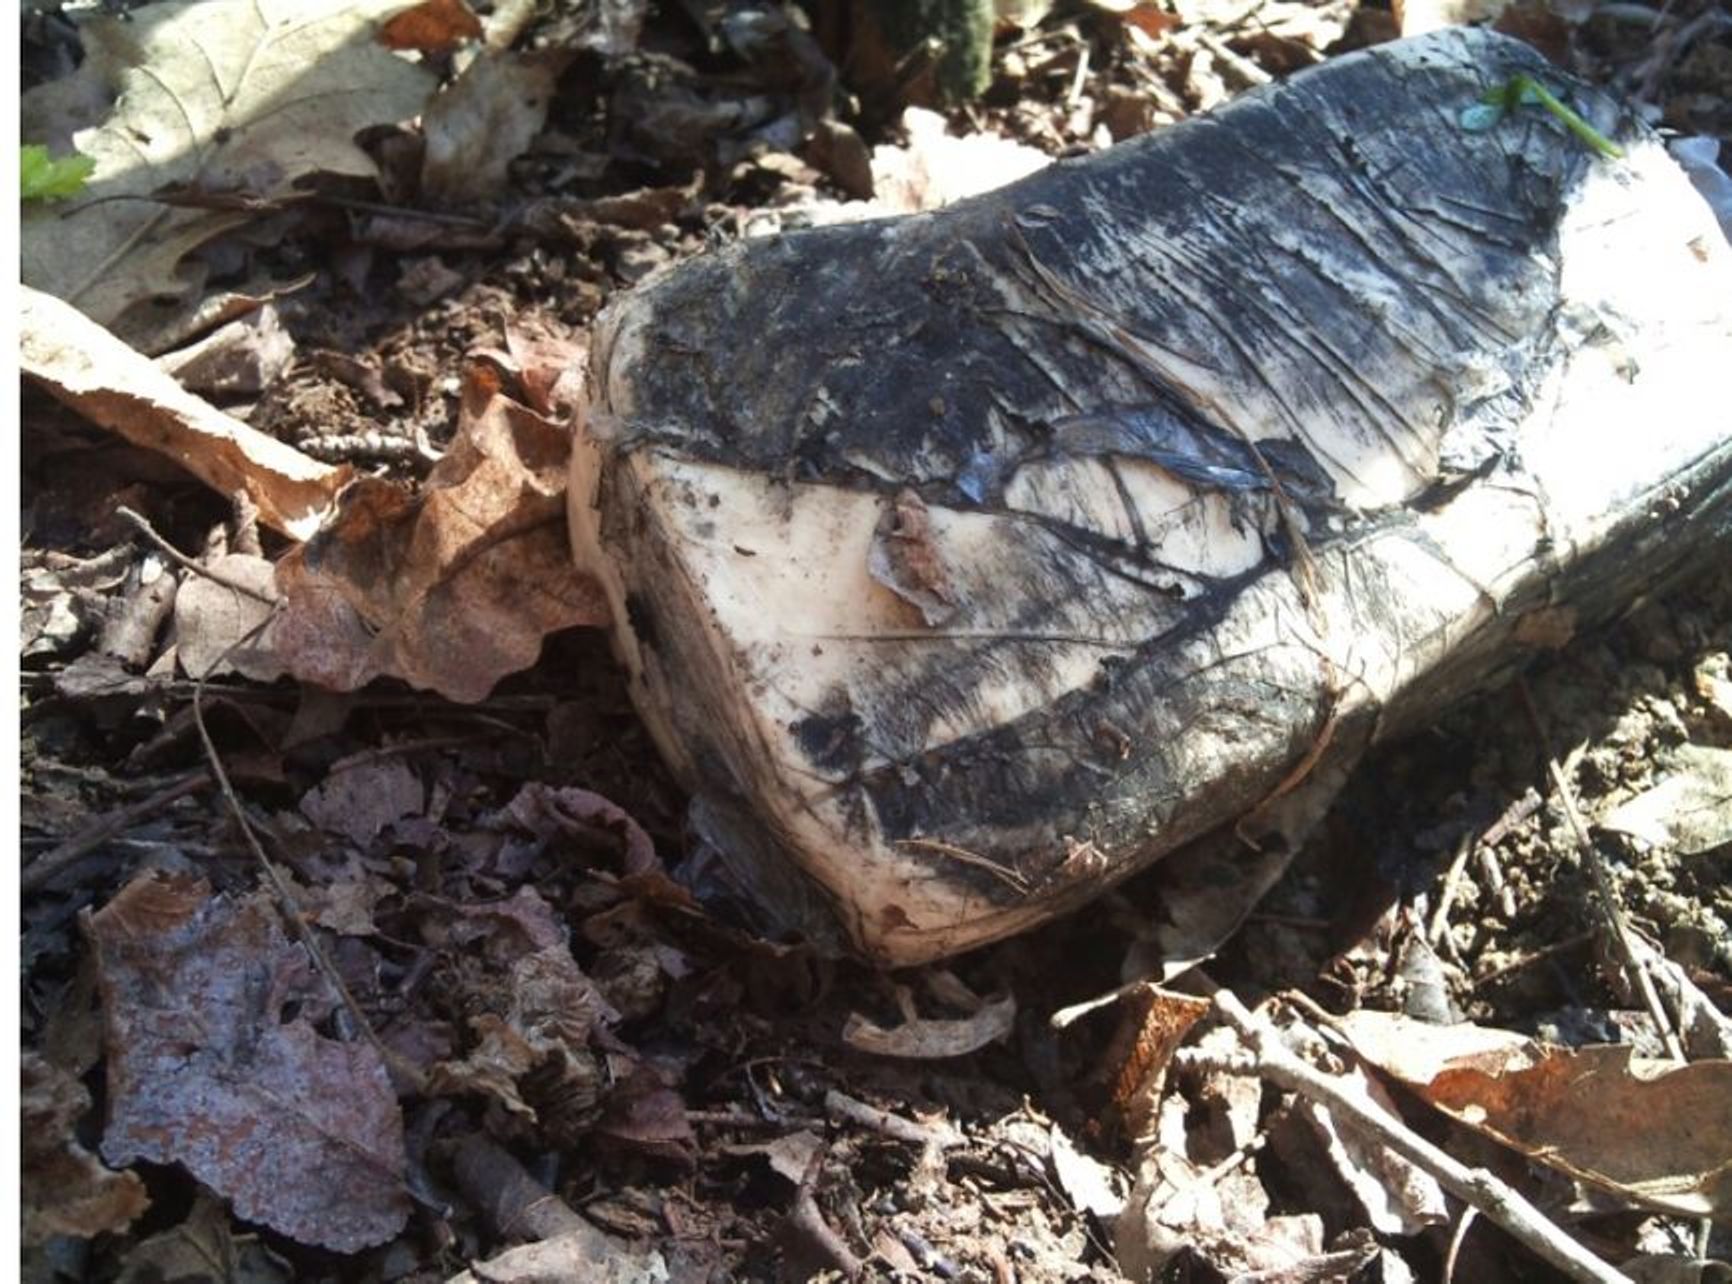 One of the unexploded packets of plastic explosive found near the explosion site.